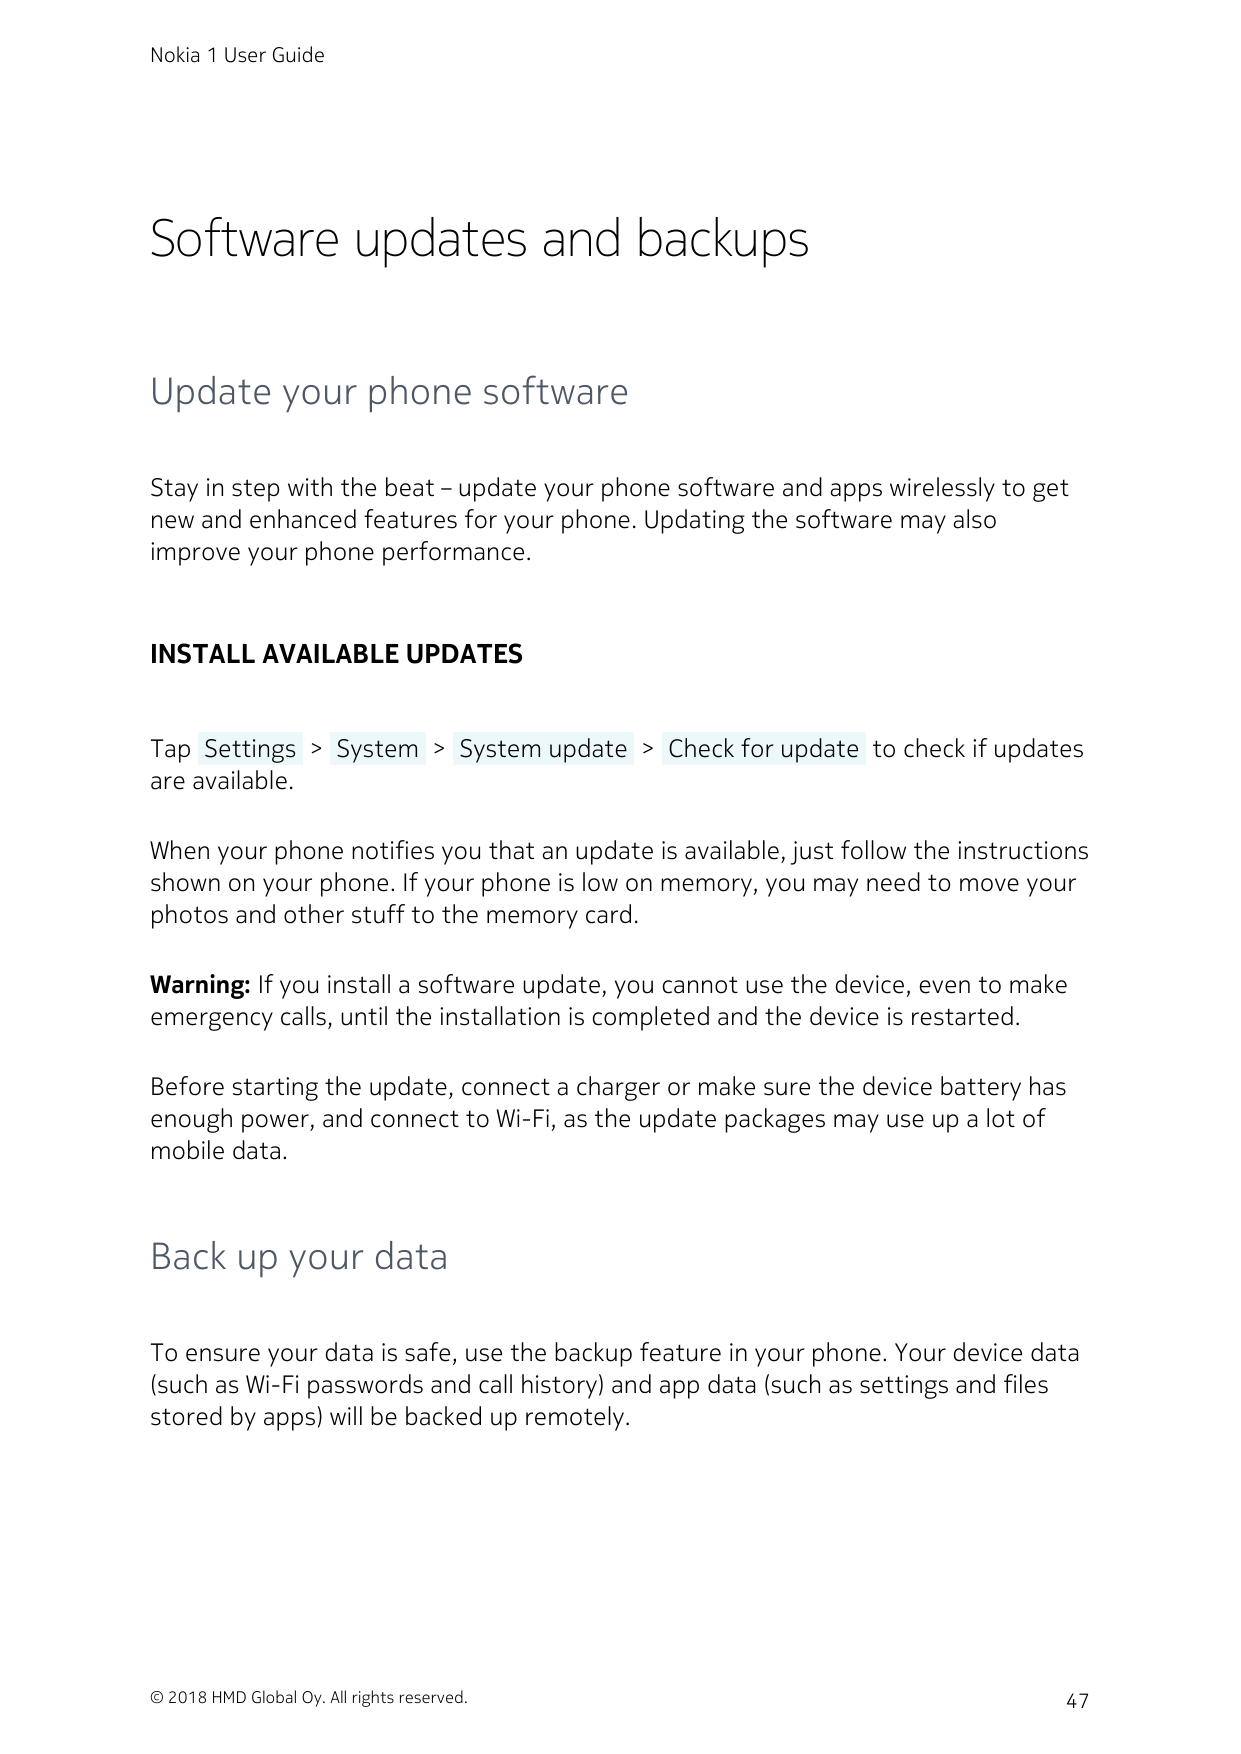 Nokia 1 User GuideSoftware updates and backupsUpdate your phone softwareStay in step with the beat – update your phone software 